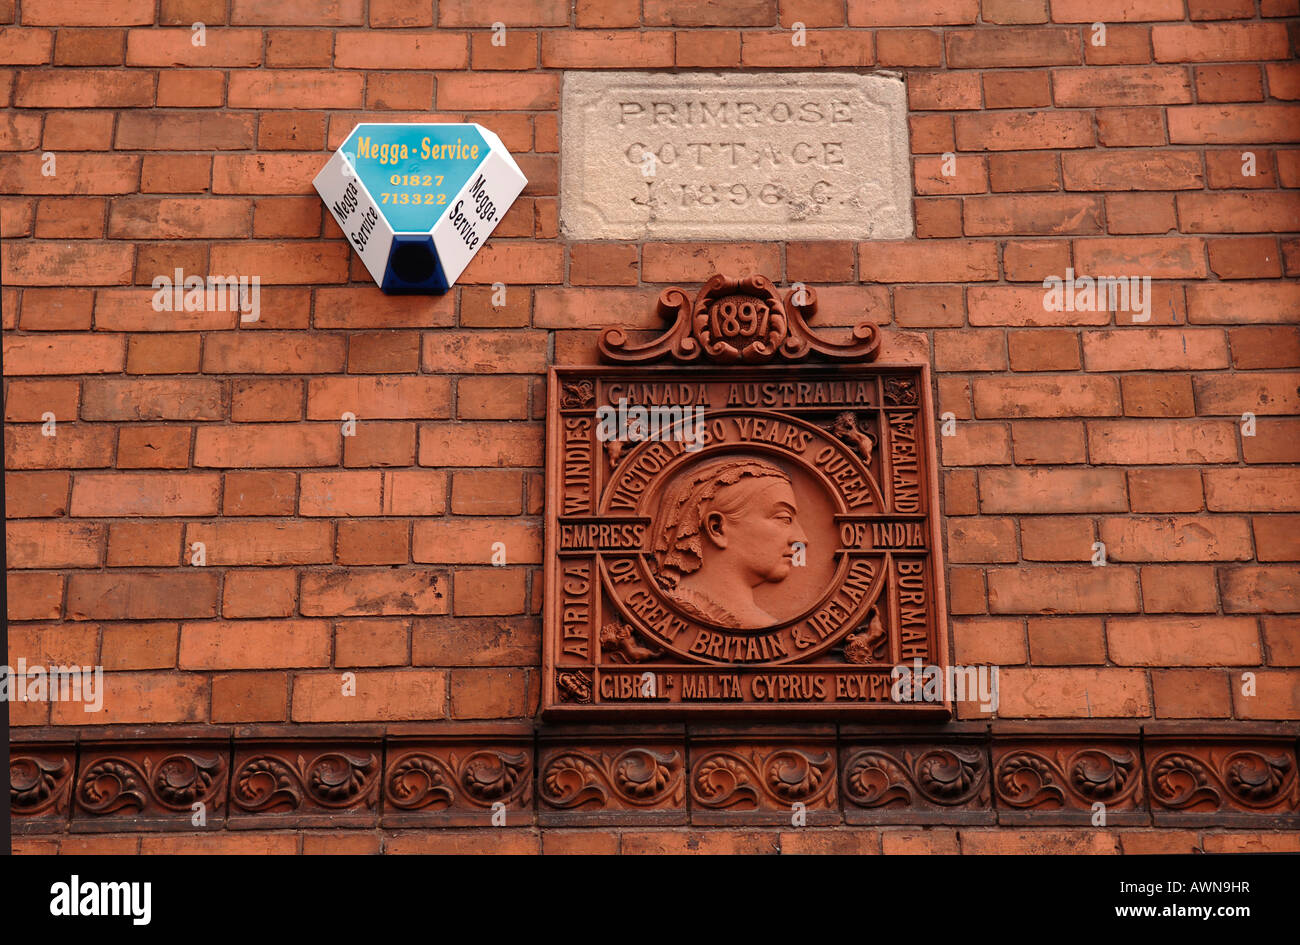 Plaque commemorating Queen Victoria's 60th birthday, house facade in Atherstone, Warwickshire, West Midlands, England, Europe Stock Photo